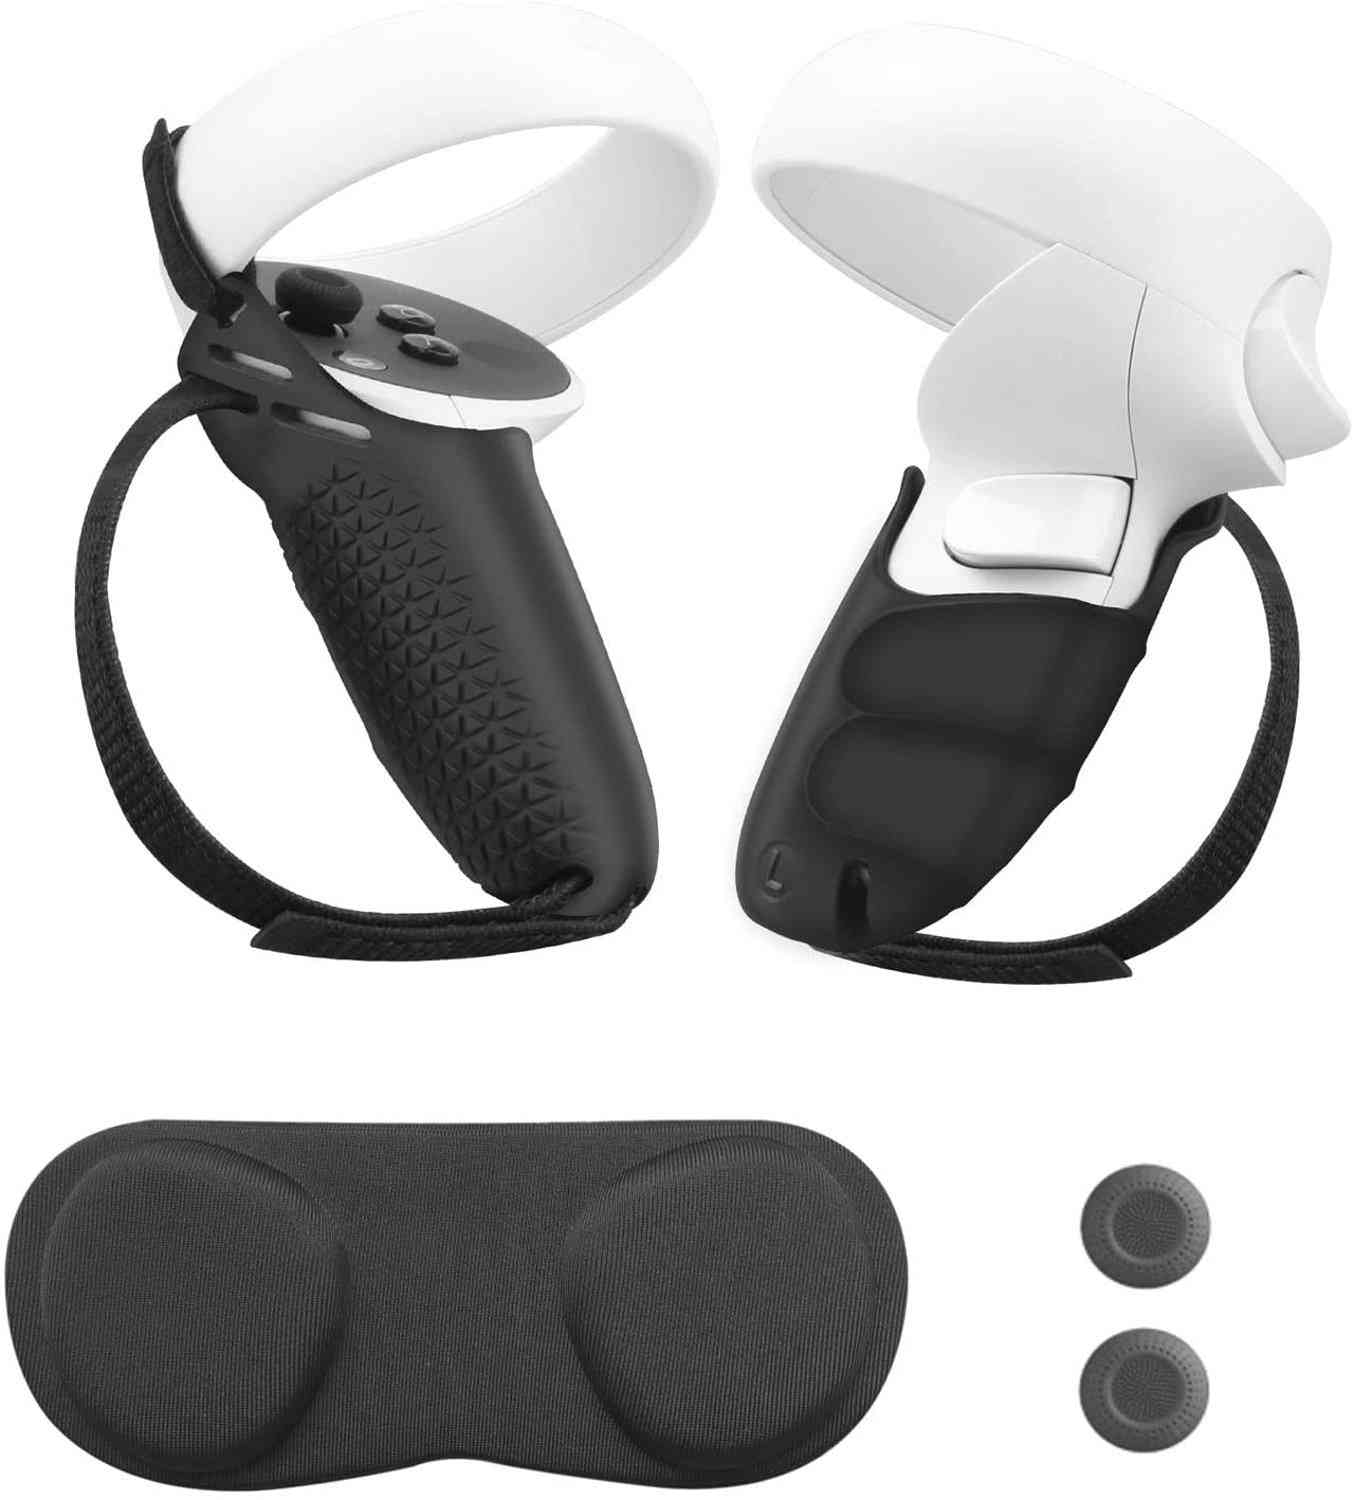 Premium Silicone, Grip Sleeve Cover, Adjustable Knuckle Strap For Oculus Quest, 2-vr Touch Controller